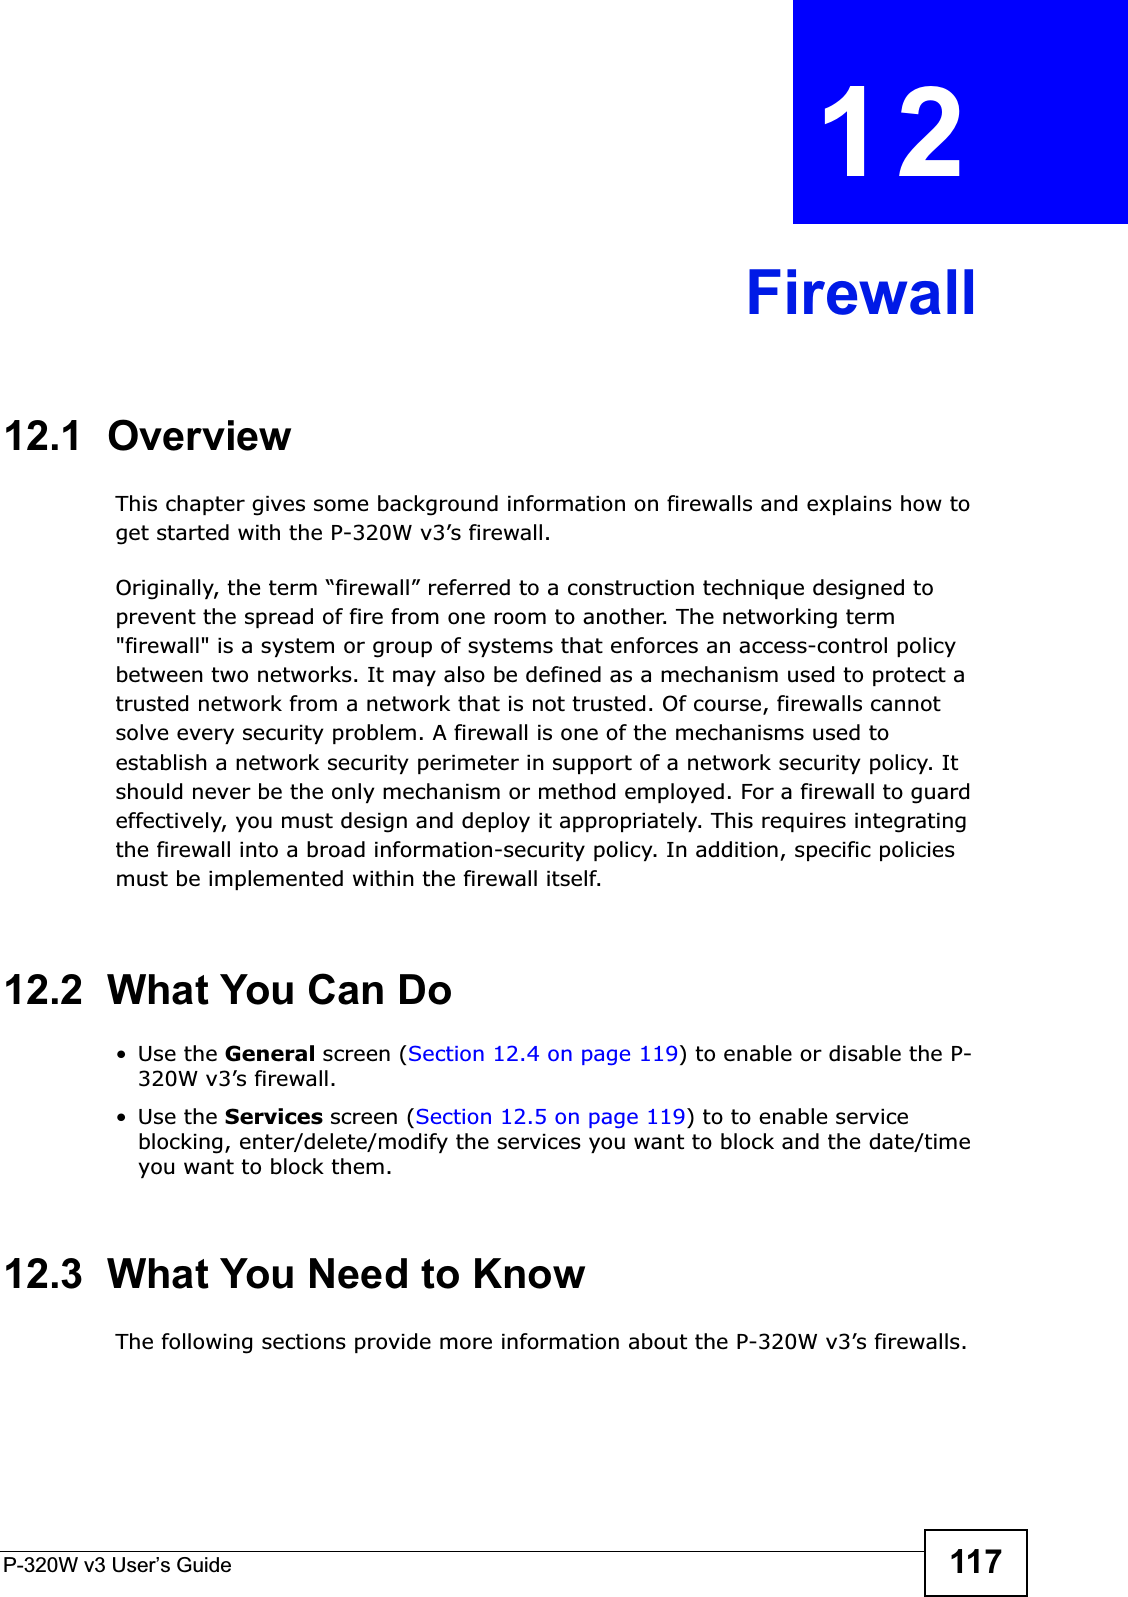 P-320W v3 User’s Guide 117CHAPTER 12Firewall12.1  OverviewThis chapter gives some background information on firewalls and explains how to get started with the P-320W v3’s firewall.Originally, the term “firewall” referred to a construction technique designed to prevent the spread of fire from one room to another. The networking term &quot;firewall&quot; is a system or group of systems that enforces an access-control policy between two networks. It may also be defined as a mechanism used to protect a trusted network from a network that is not trusted. Of course, firewalls cannot solve every security problem. A firewall is one of the mechanisms used to establish a network security perimeter in support of a network security policy. It should never be the only mechanism or method employed. For a firewall to guard effectively, you must design and deploy it appropriately. This requires integrating the firewall into a broad information-security policy. In addition, specific policies must be implemented within the firewall itself. 12.2  What You Can Do•Use the General screen (Section 12.4 on page 119) to enable or disable the P-320W v3’s firewall.•Use the Services screen (Section 12.5 on page 119) to to enable service blocking, enter/delete/modify the services you want to block and the date/time you want to block them.12.3  What You Need to KnowThe following sections provide more information about the P-320W v3’s firewalls.